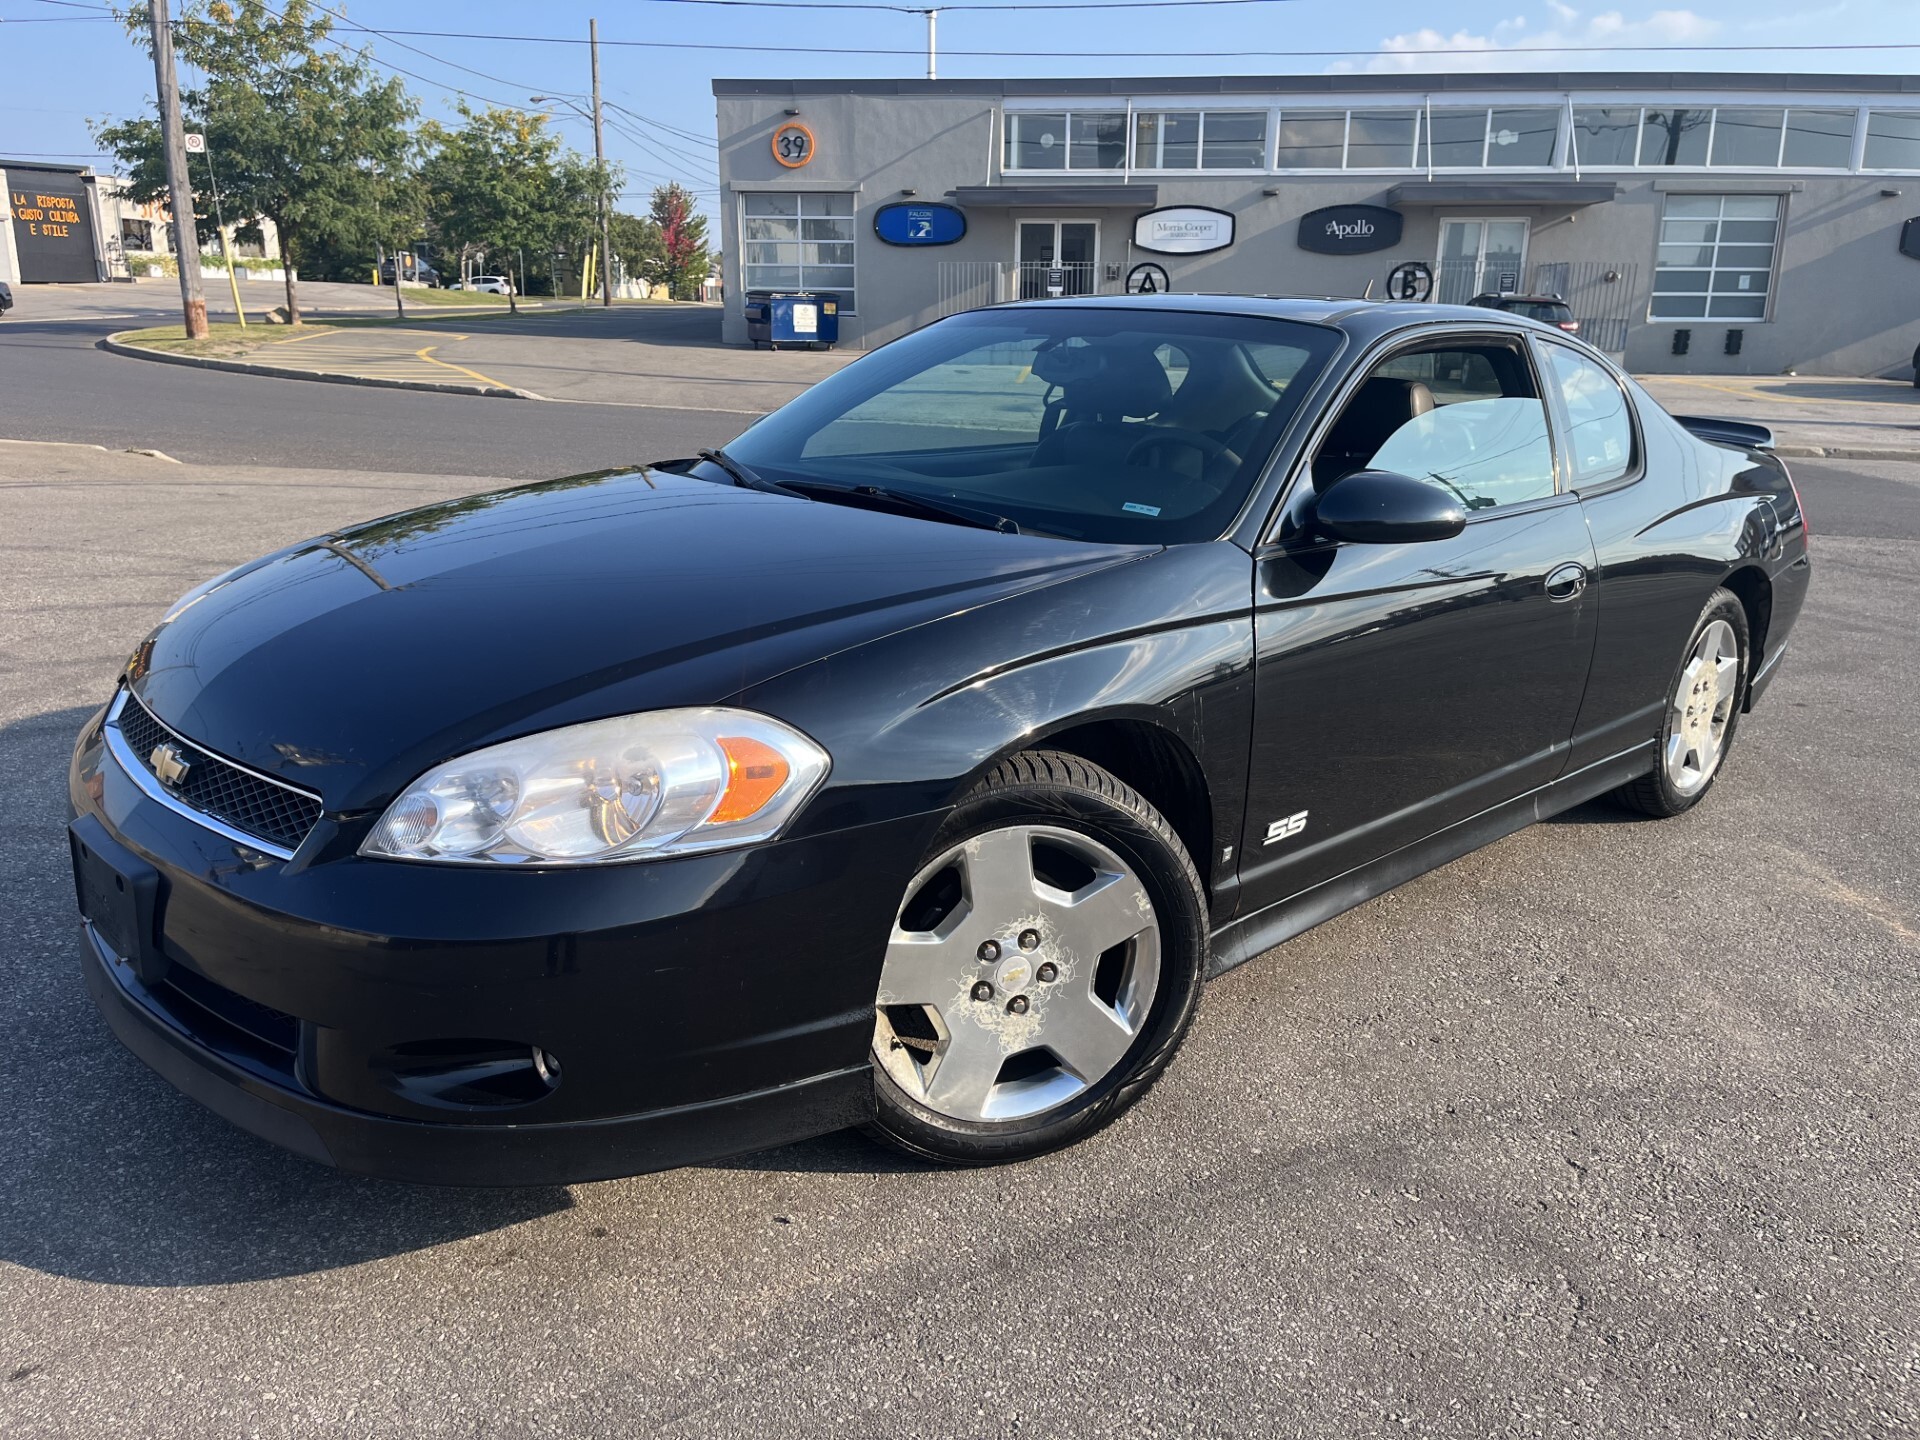 2006 Chevrolet Monte Carlo SS V8 5.3L **303HP-LEATHER-ROOF-NO ACCIDENTS*